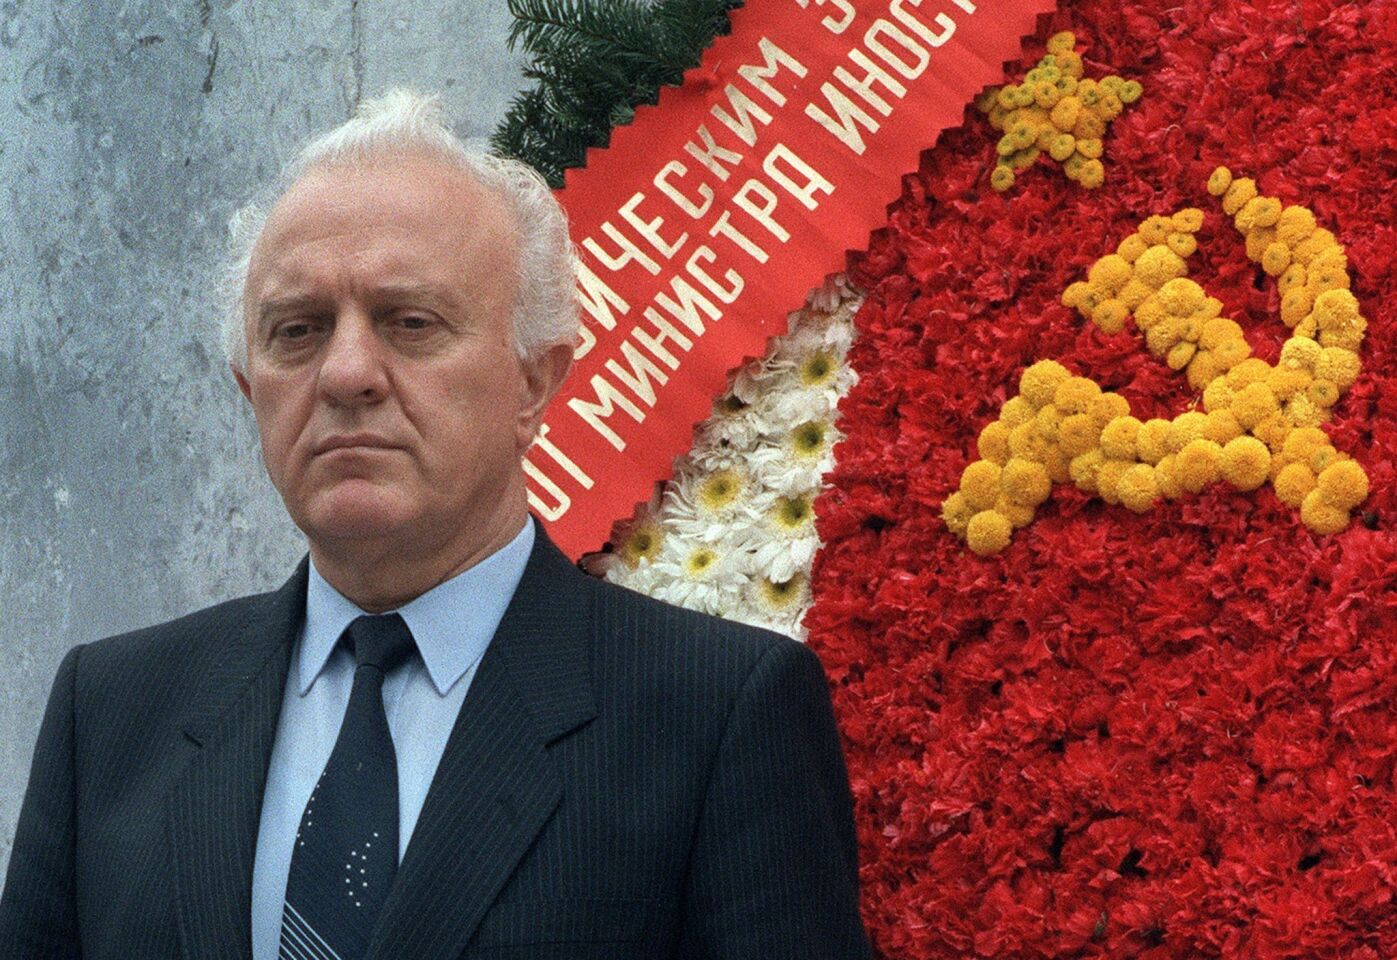 The groundbreaking Soviet foreign minister later became the president of an independent Georgia. In the final years of the Soviet Union, he helped topple the Berlin Wall and end the Cold War. He was 86.